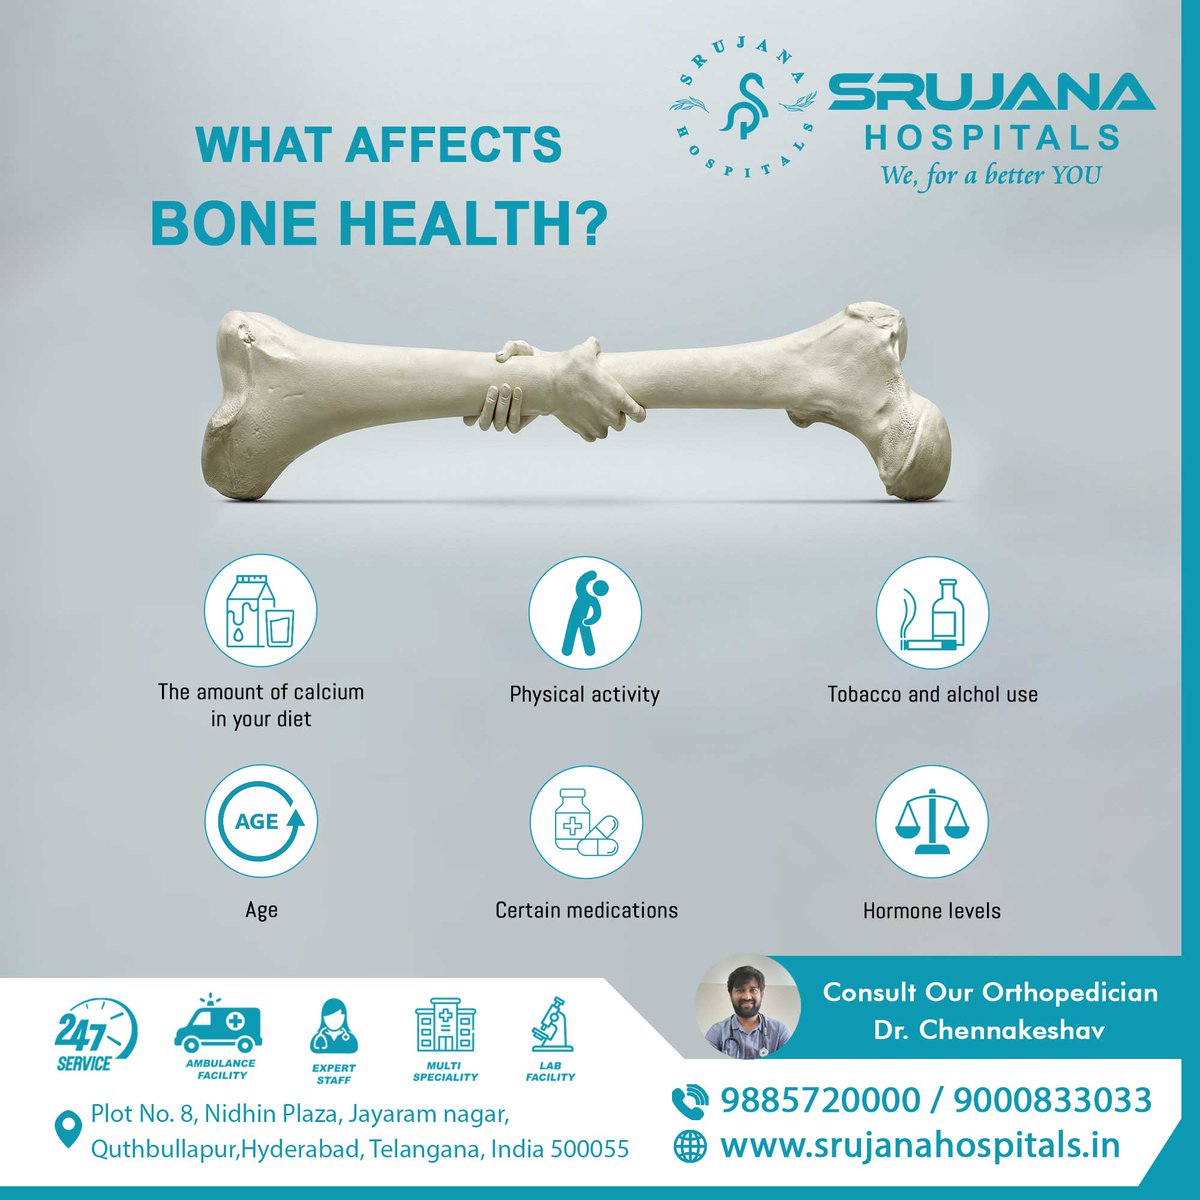 A few tips are mentioned here, follow it
To keep your bones strong and healthy.

#bonehealth #osteoporosis #health #healthylifestyle #calcium #vitamind #healthybones #jointhealth #osteoporosisprevention #strongbones #bonedensity #physicalactivity #srujanahospitals #Hyderabad